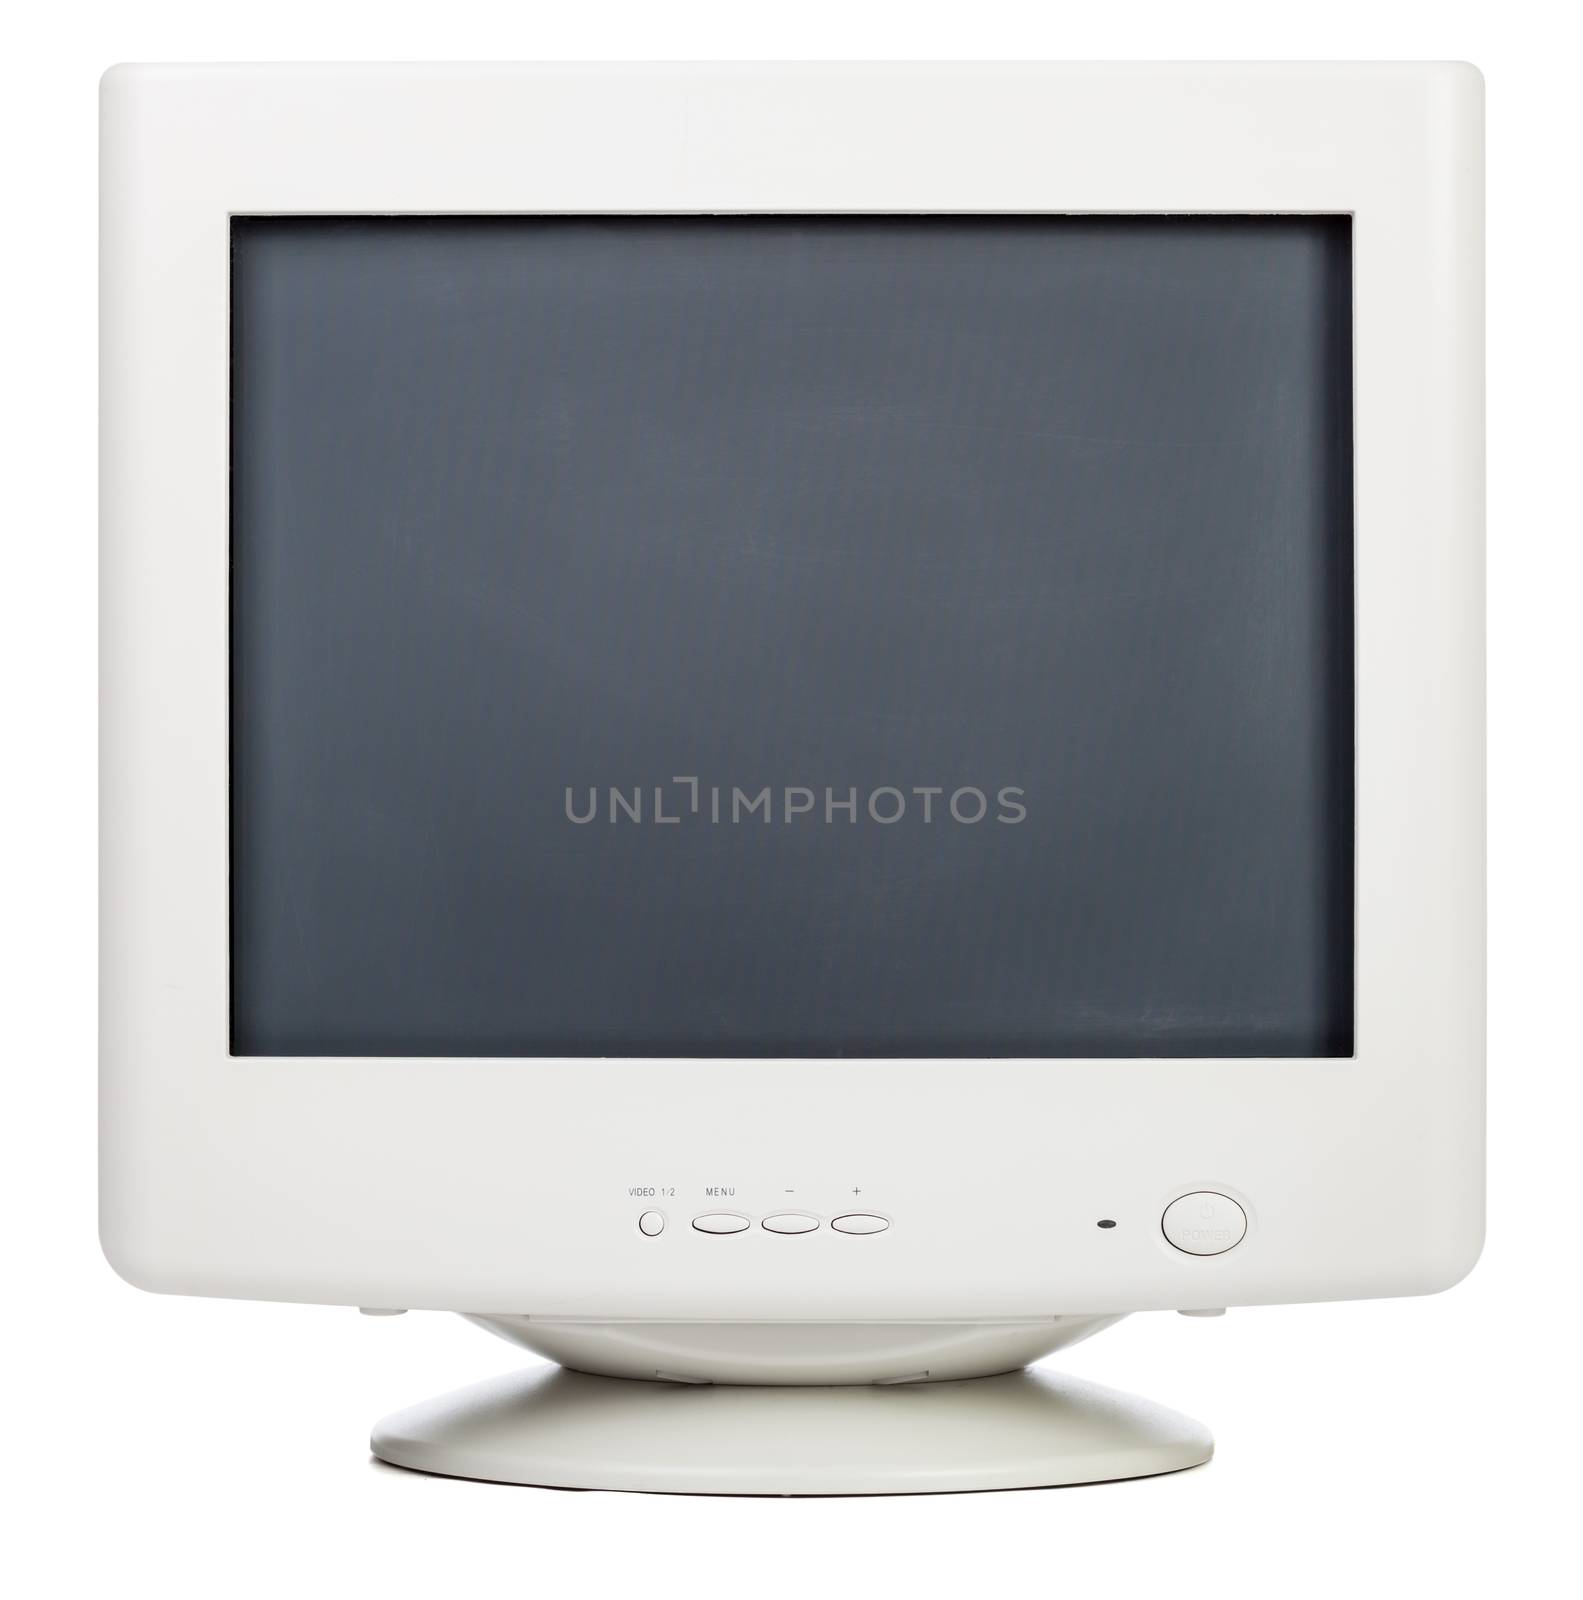 Vintage CRT computer monitor on white background